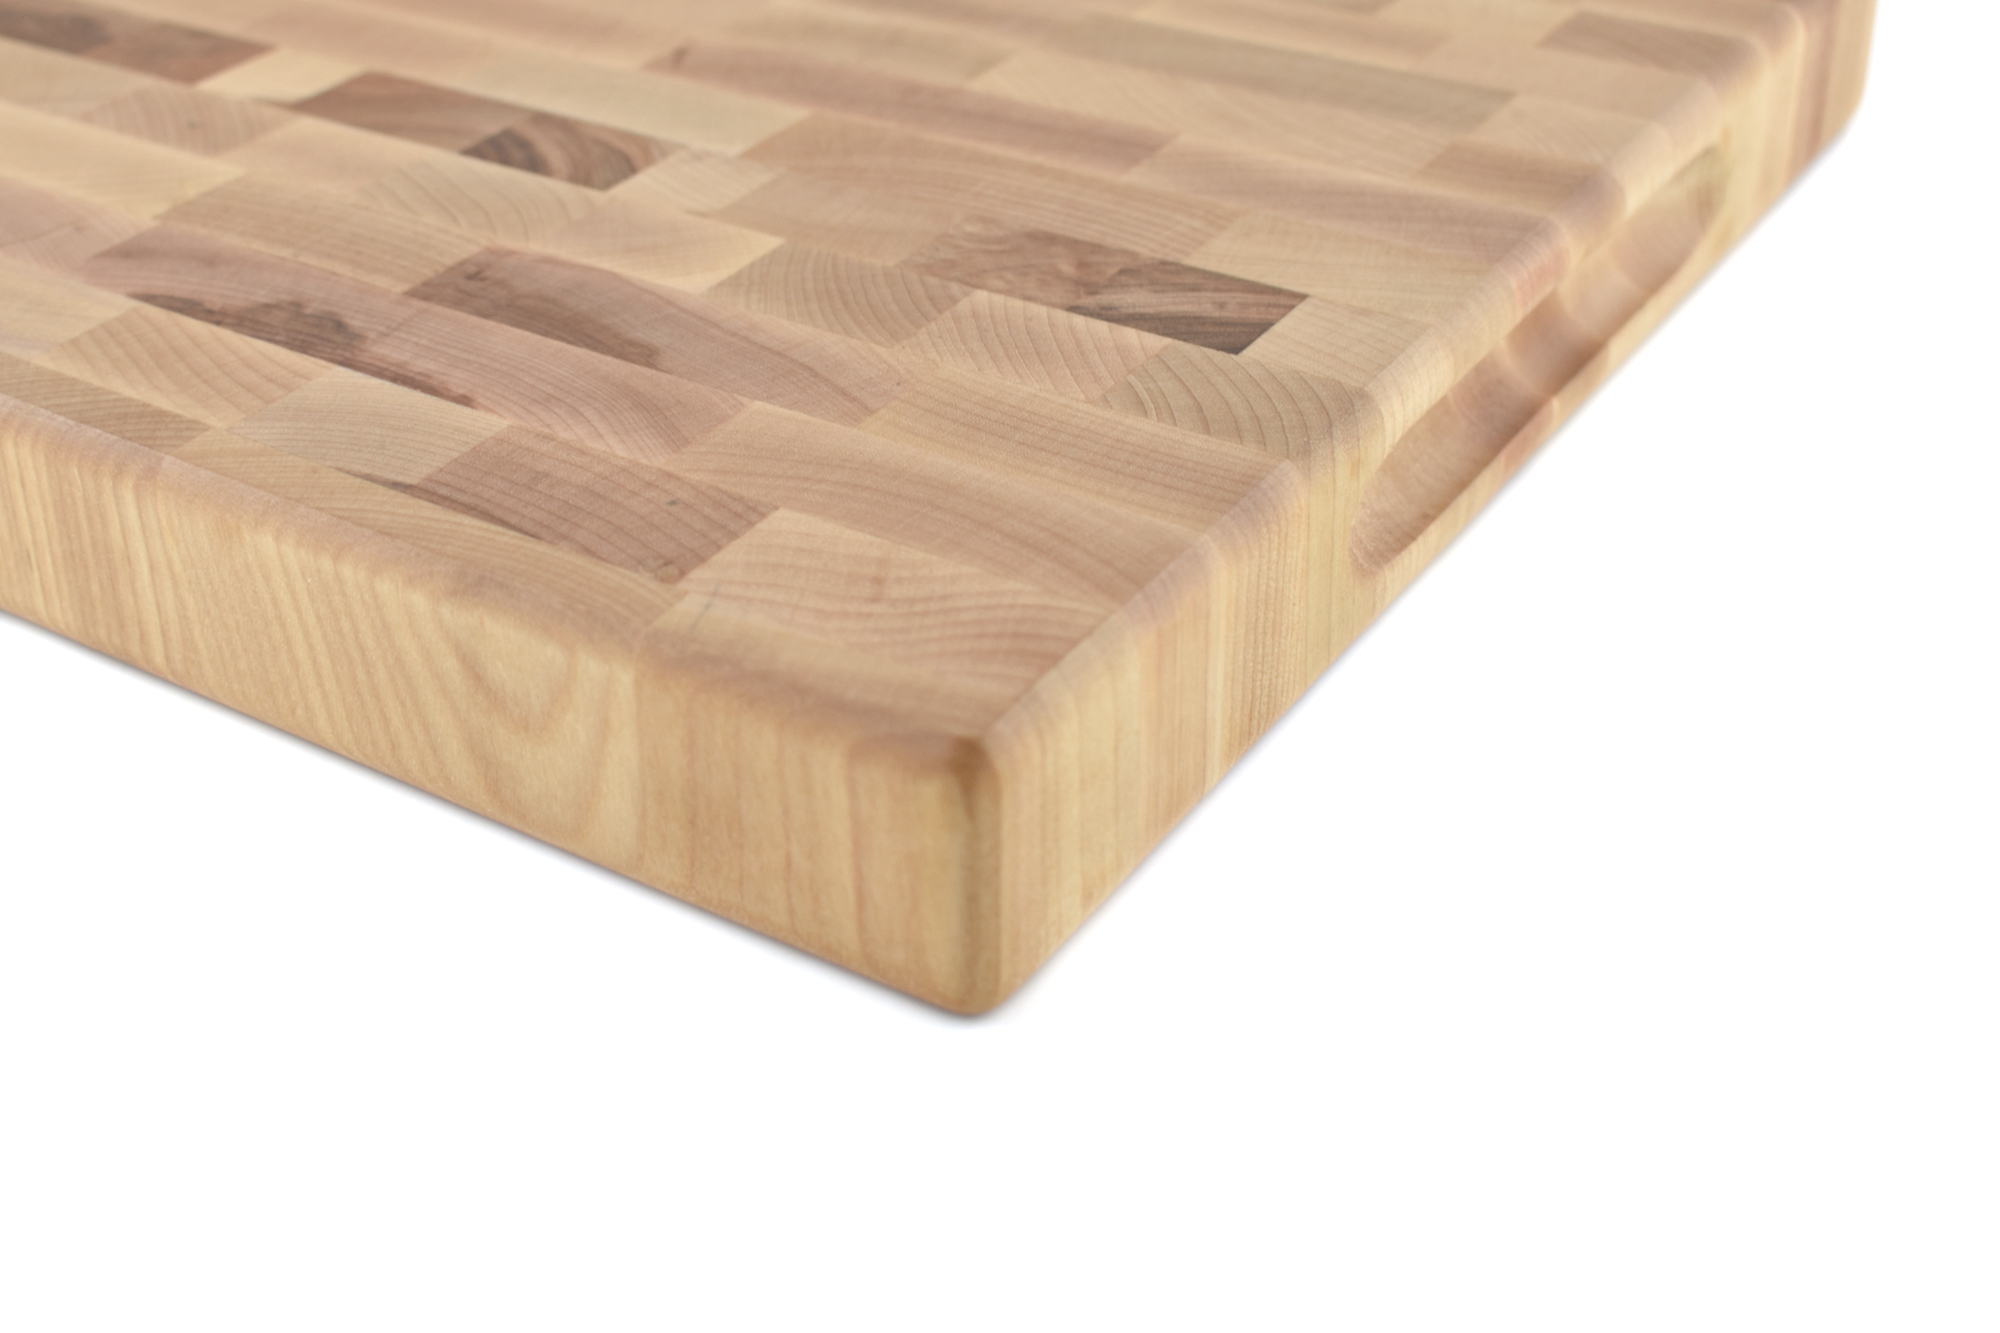 Medium Maple End grain butcher block with side handle indents 